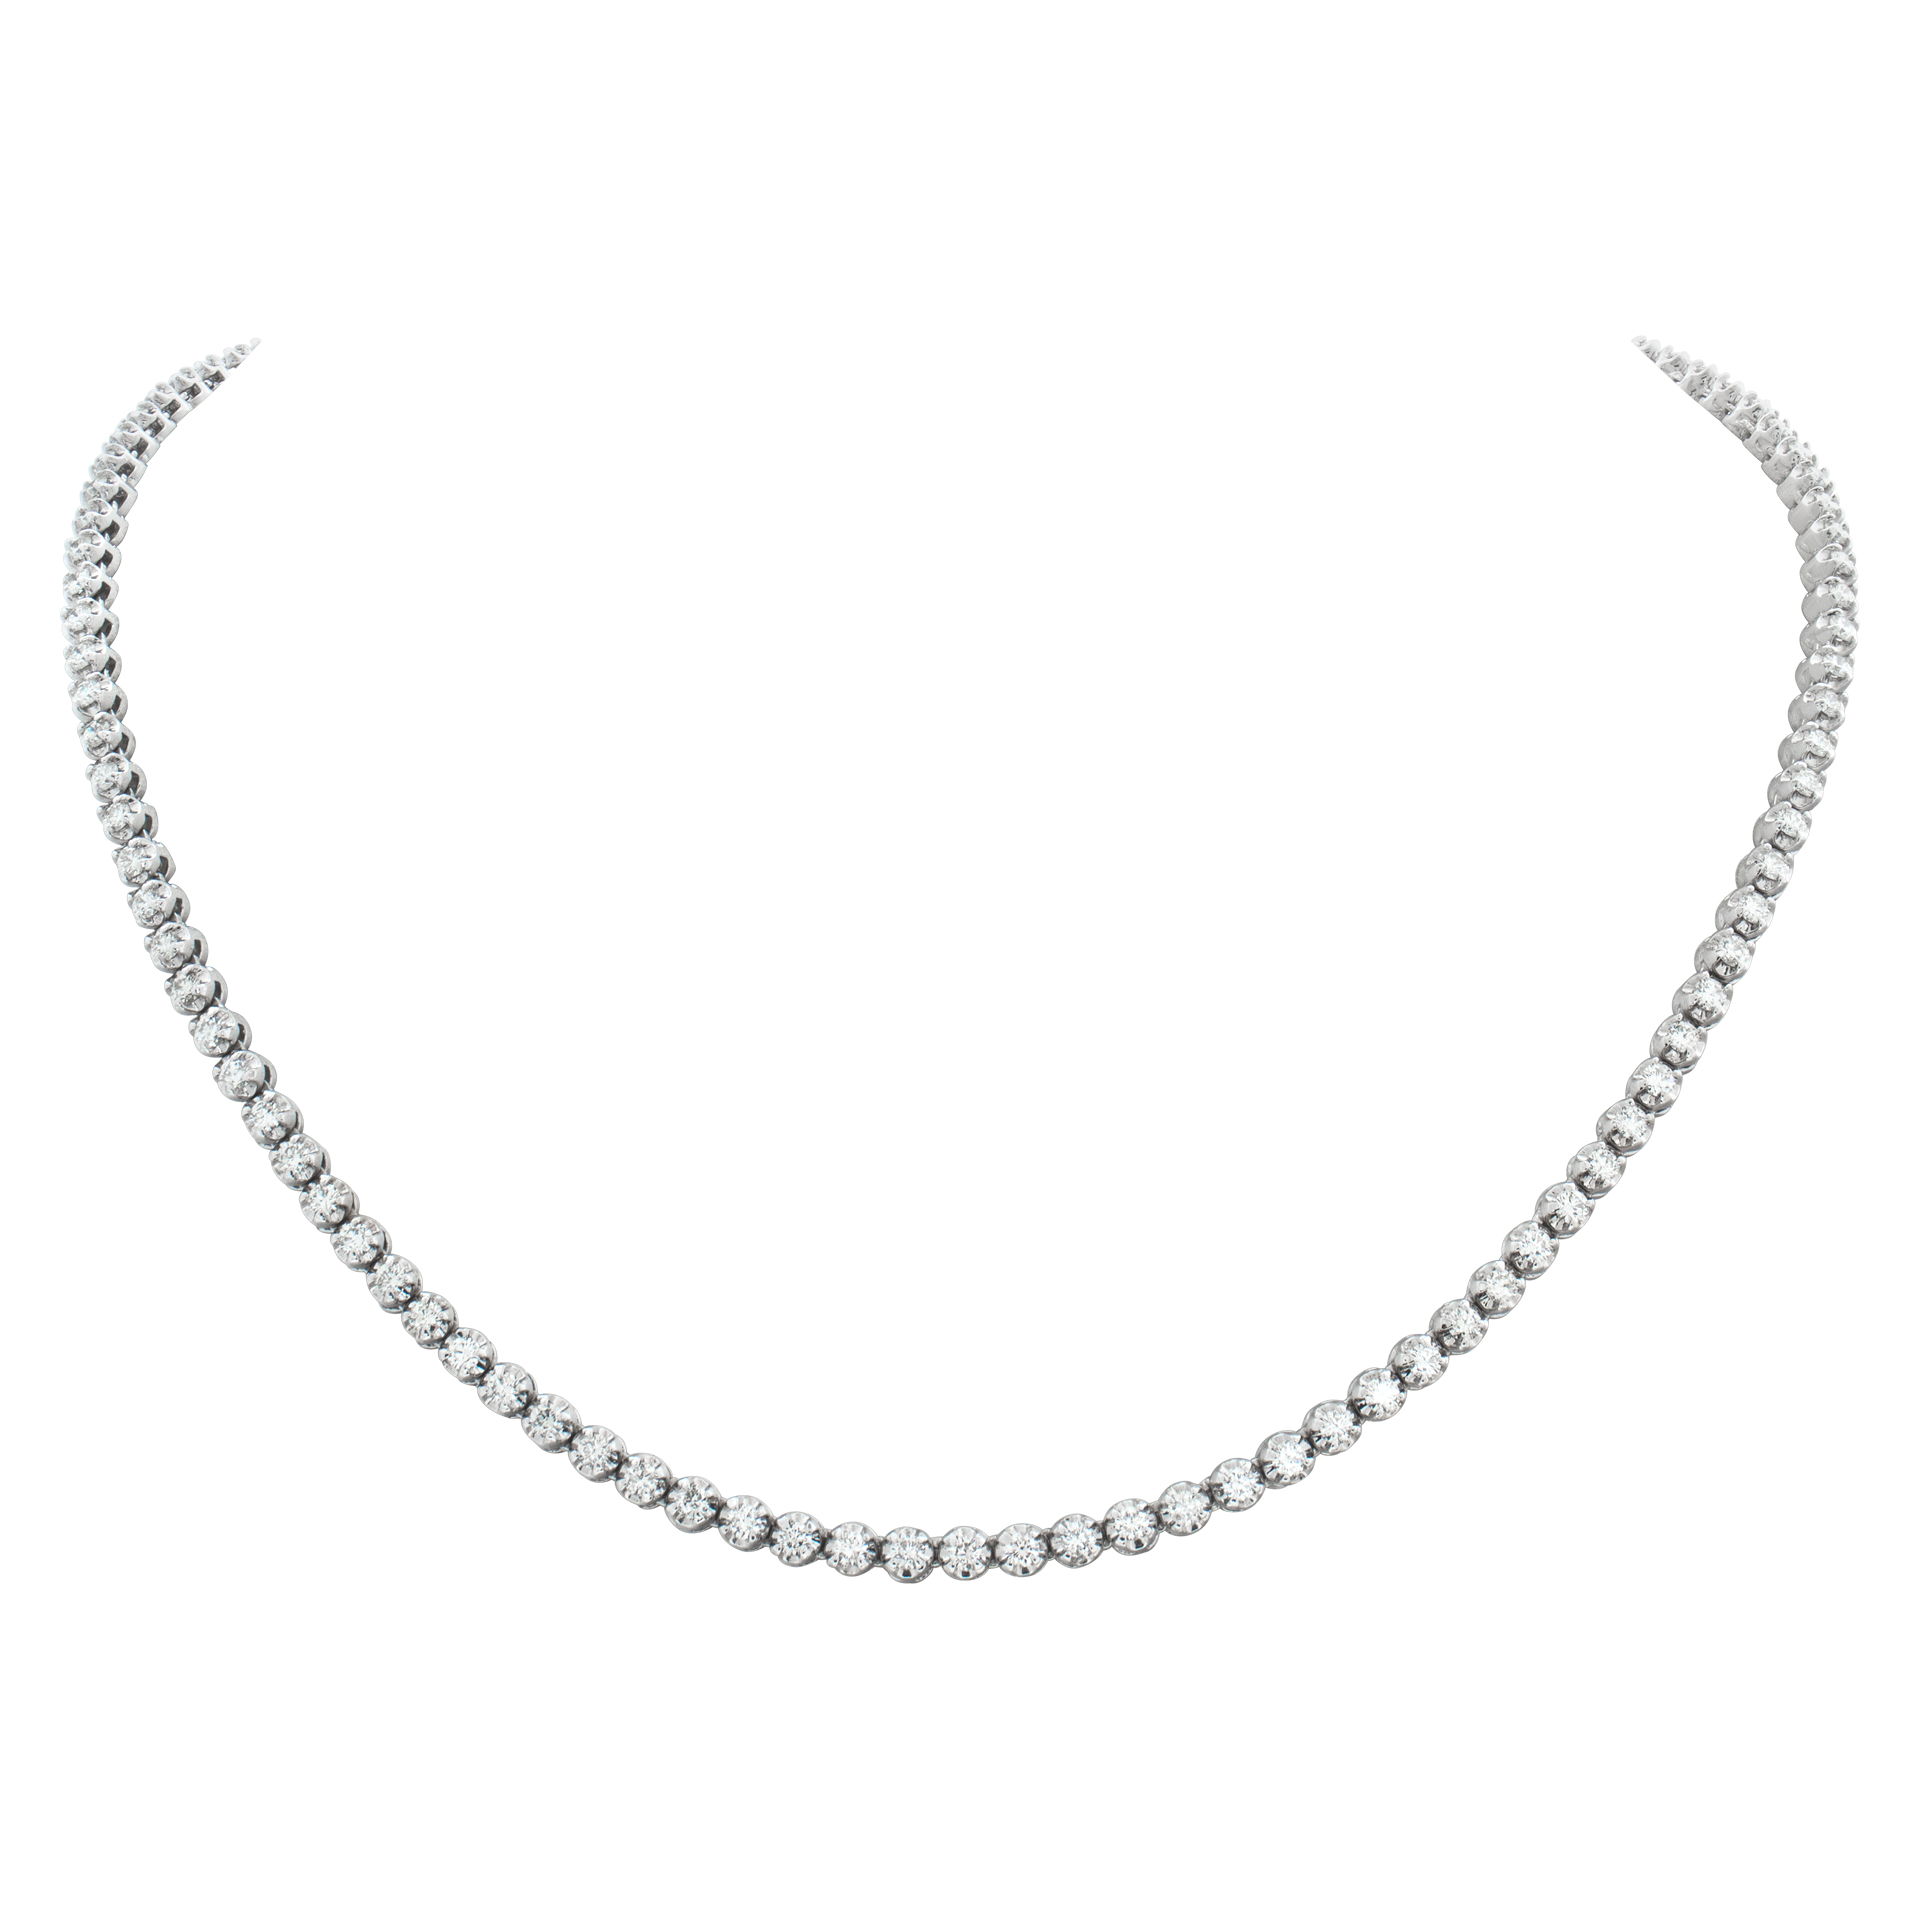 14k white gold line necklace with approximately 4 carats in diamonds image 1